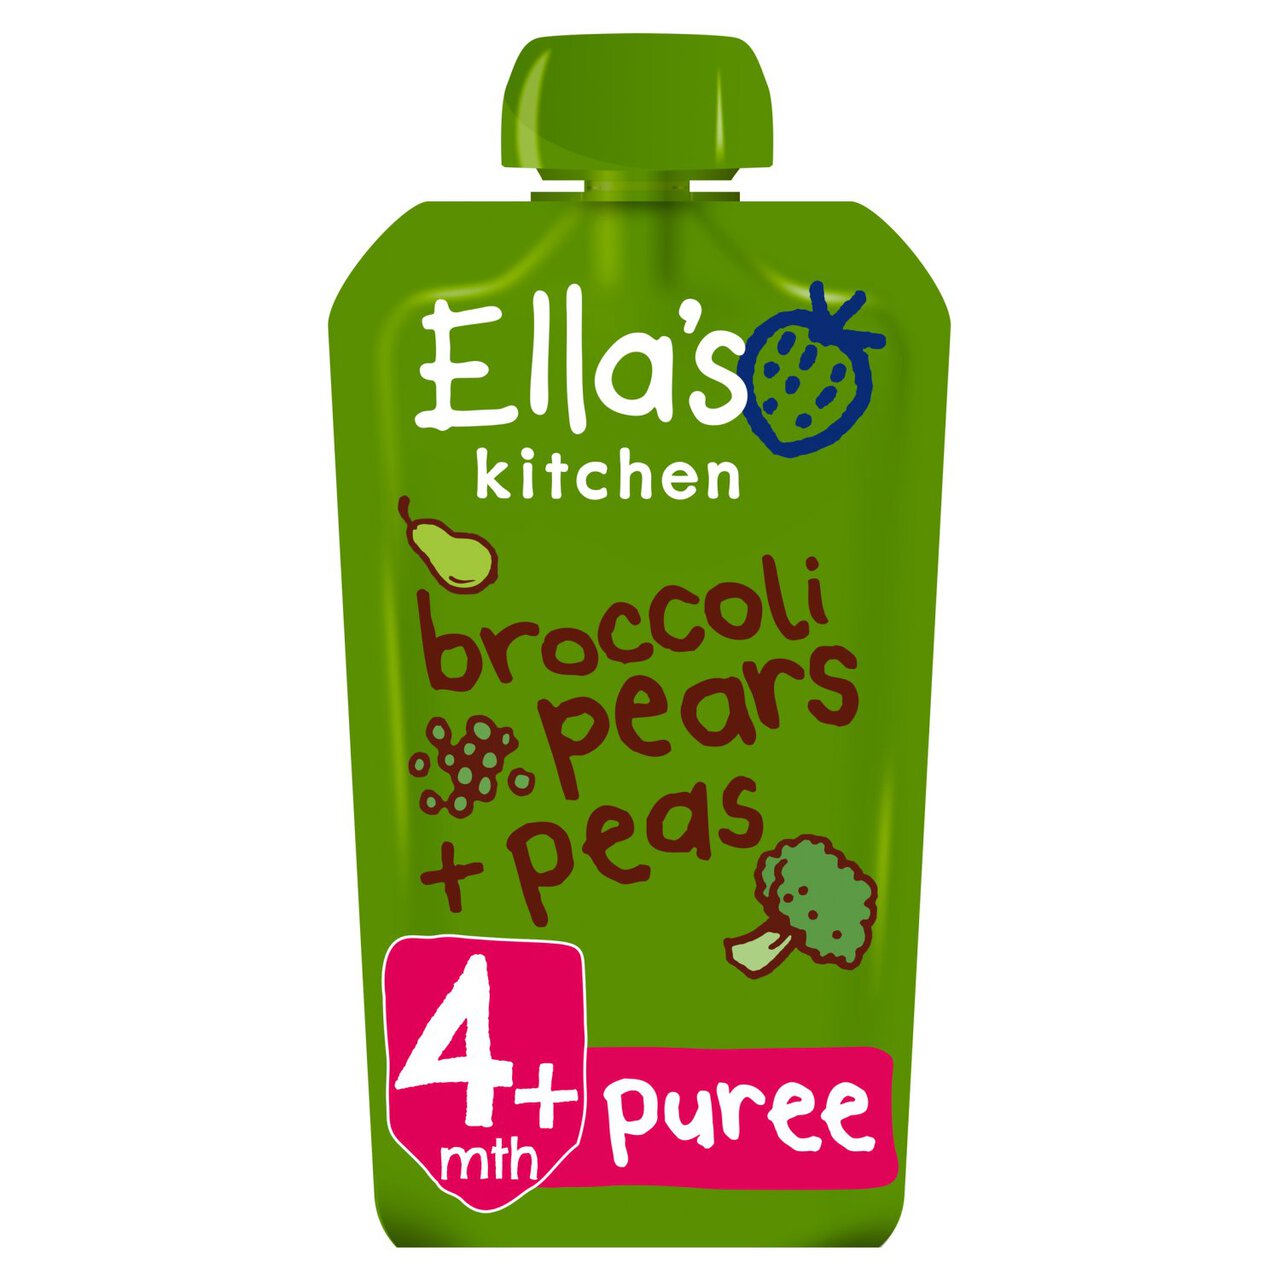 Ella's Kitchen Pears, Peas and Broccoli Baby Food Pouch 4+ Months 120g